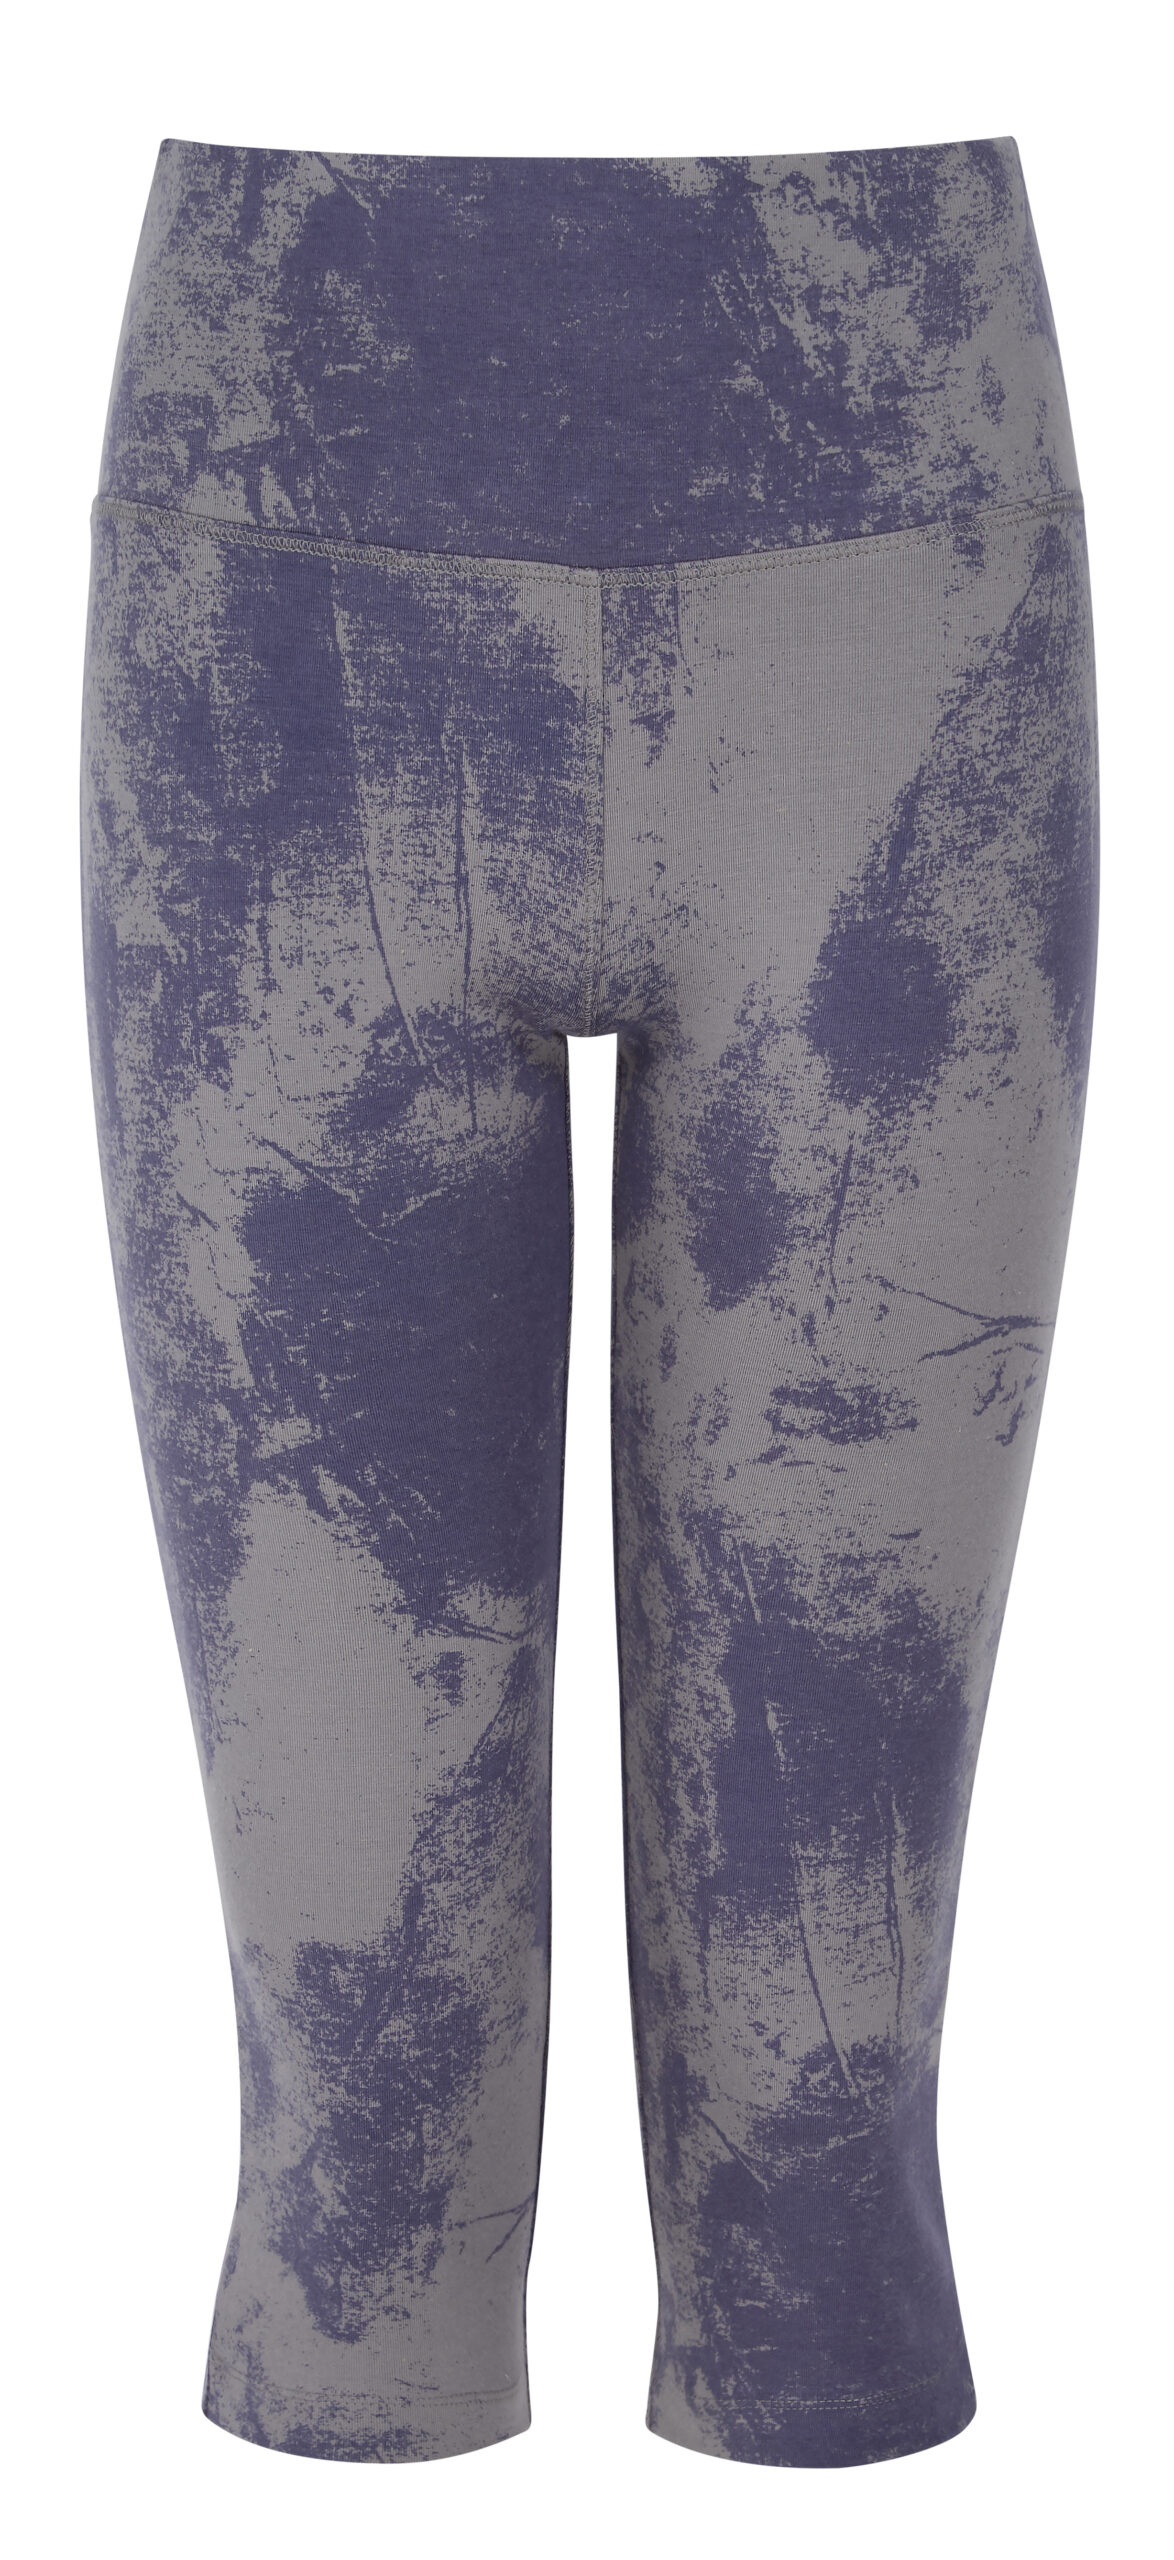 Cropped leggings, £27.50, Asquith